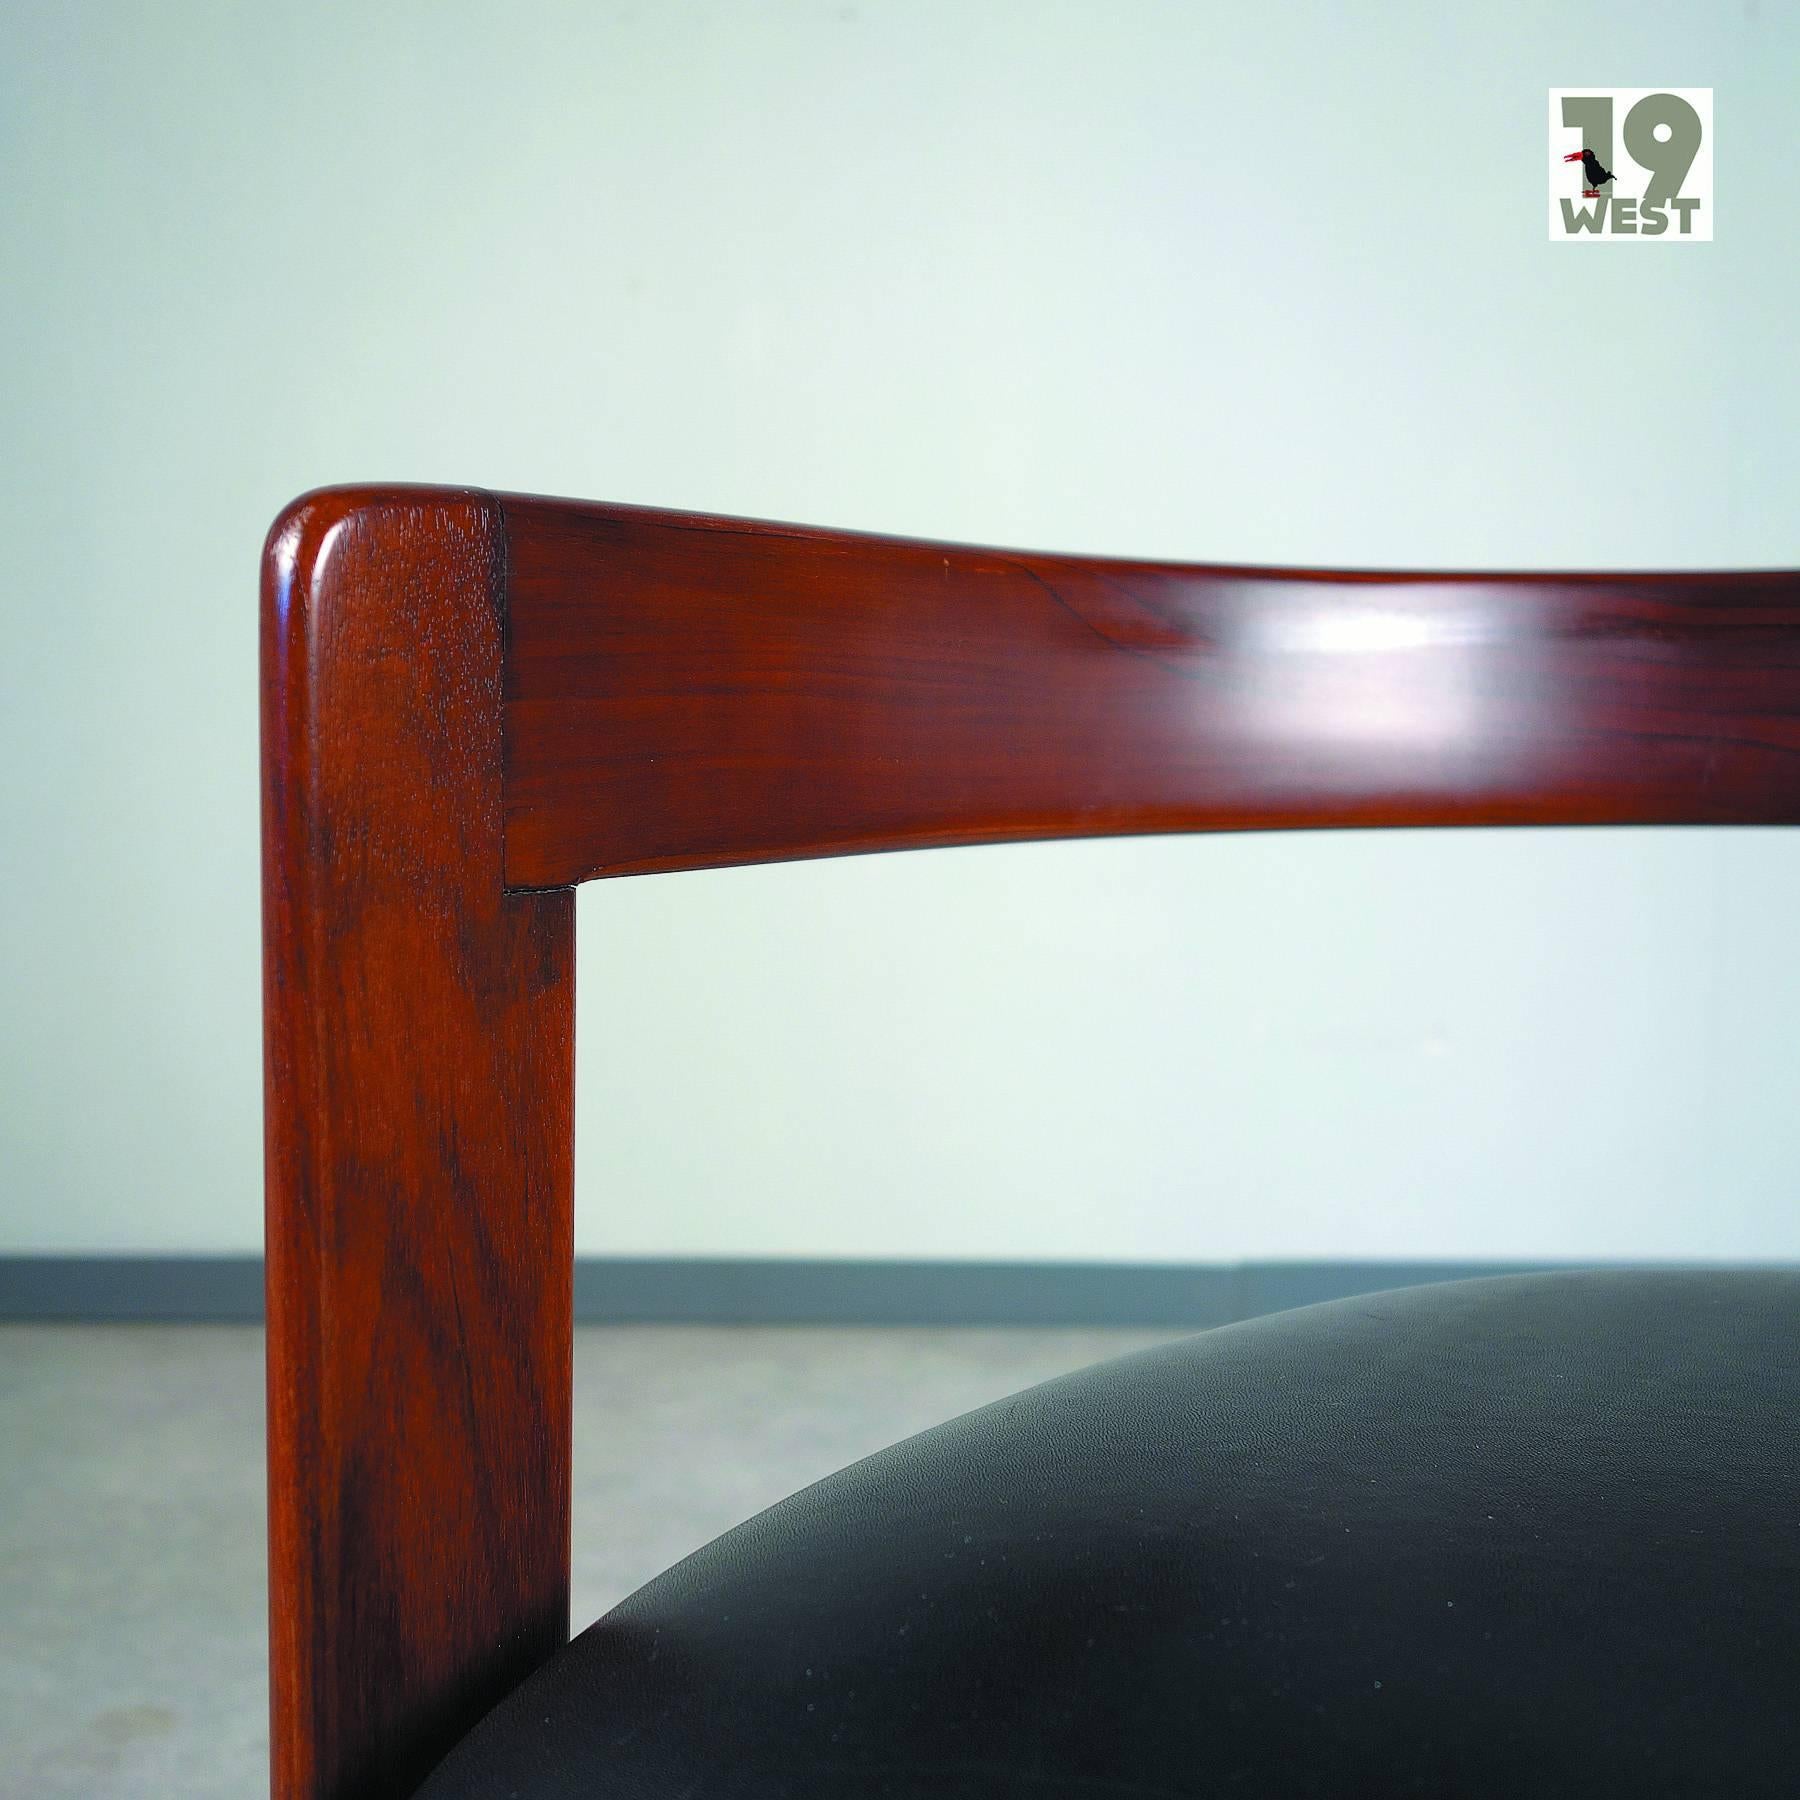 Pigreco Armchair, Designed by Afra & Tobia Scarpa, Manufactured by Gavina 1